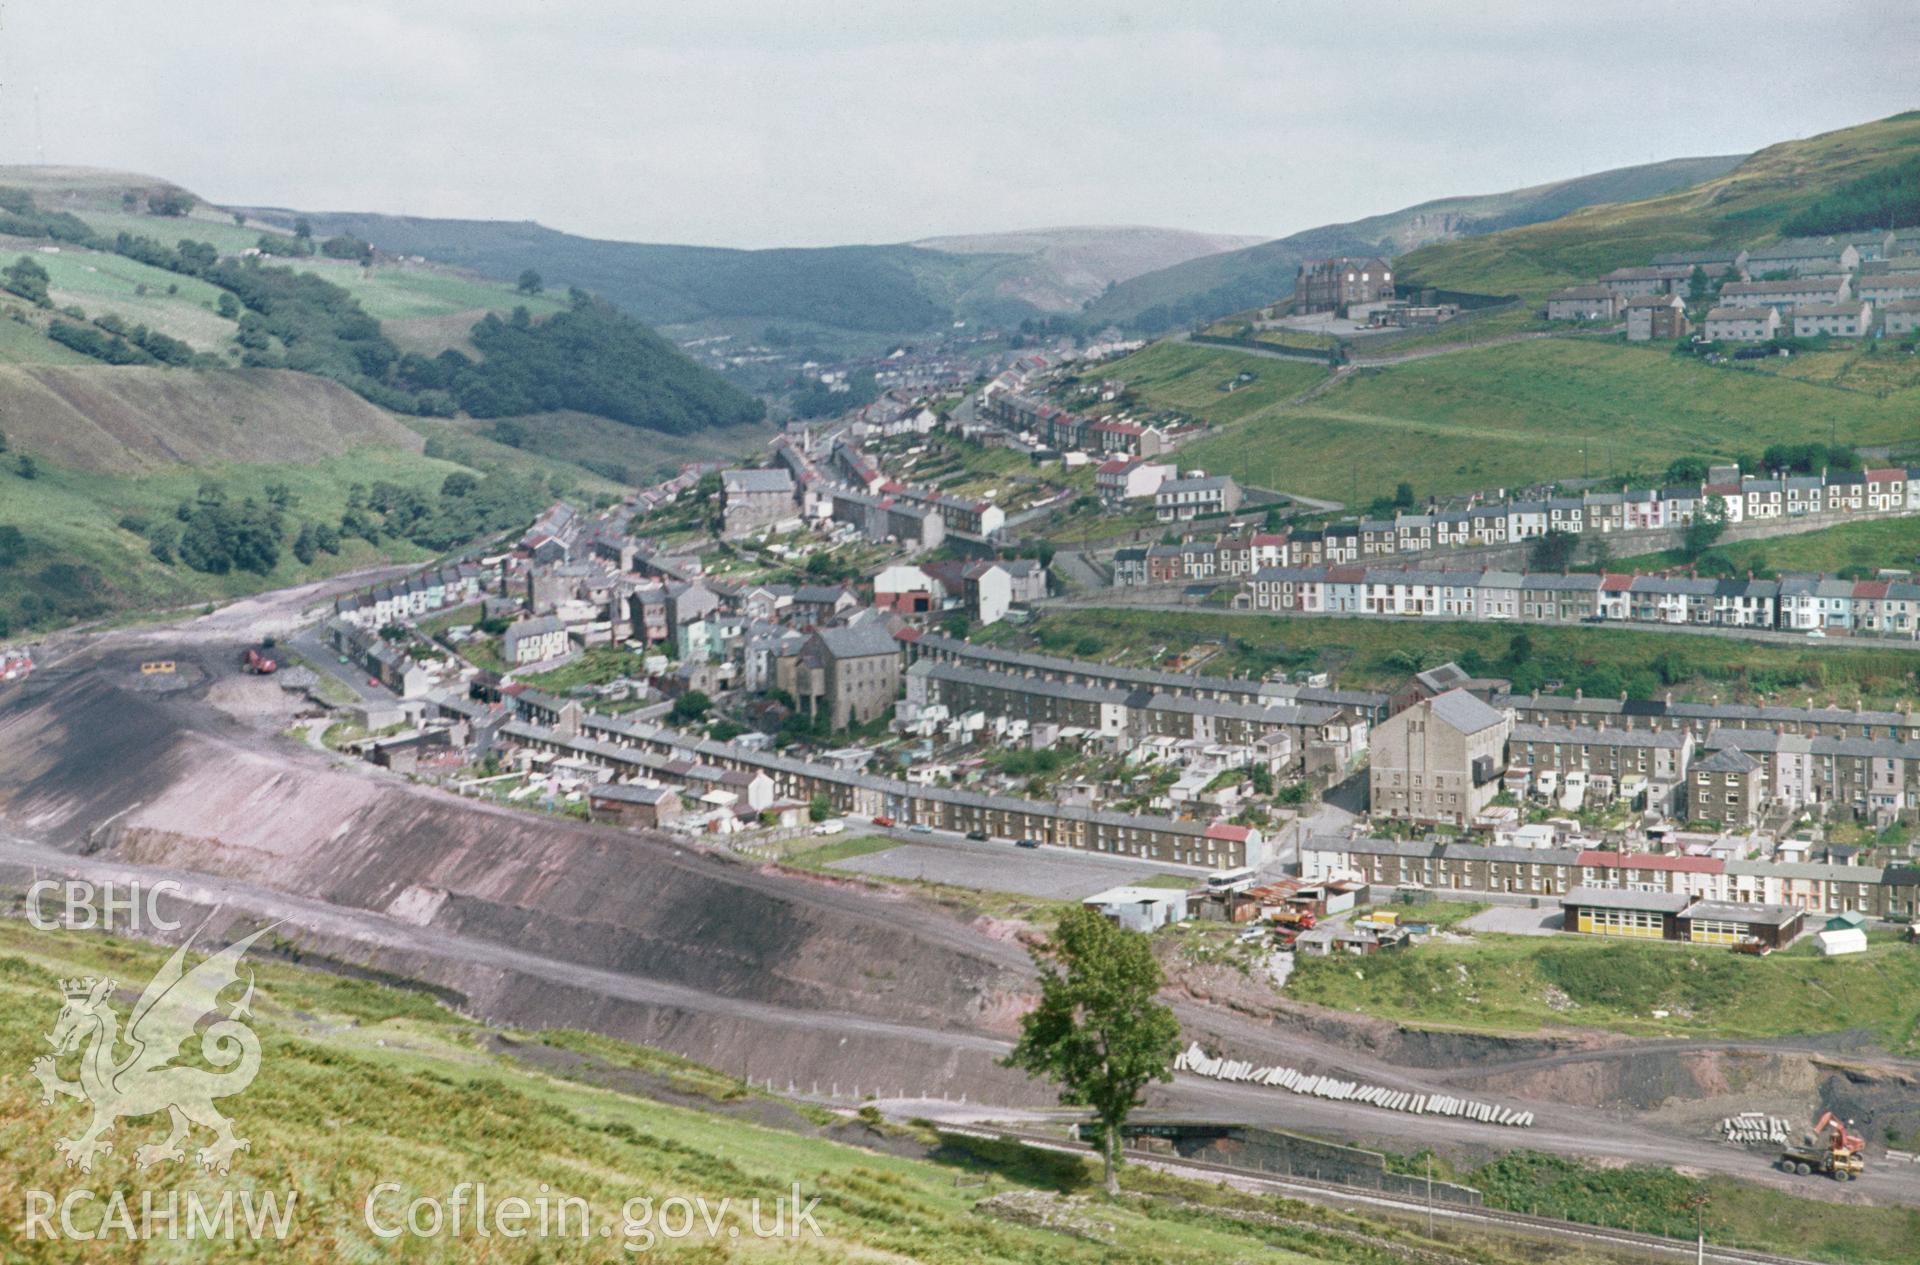 Colour 35mm slide of Tylorstown, Rhondda Fach, by Dylan Roberts, undated.